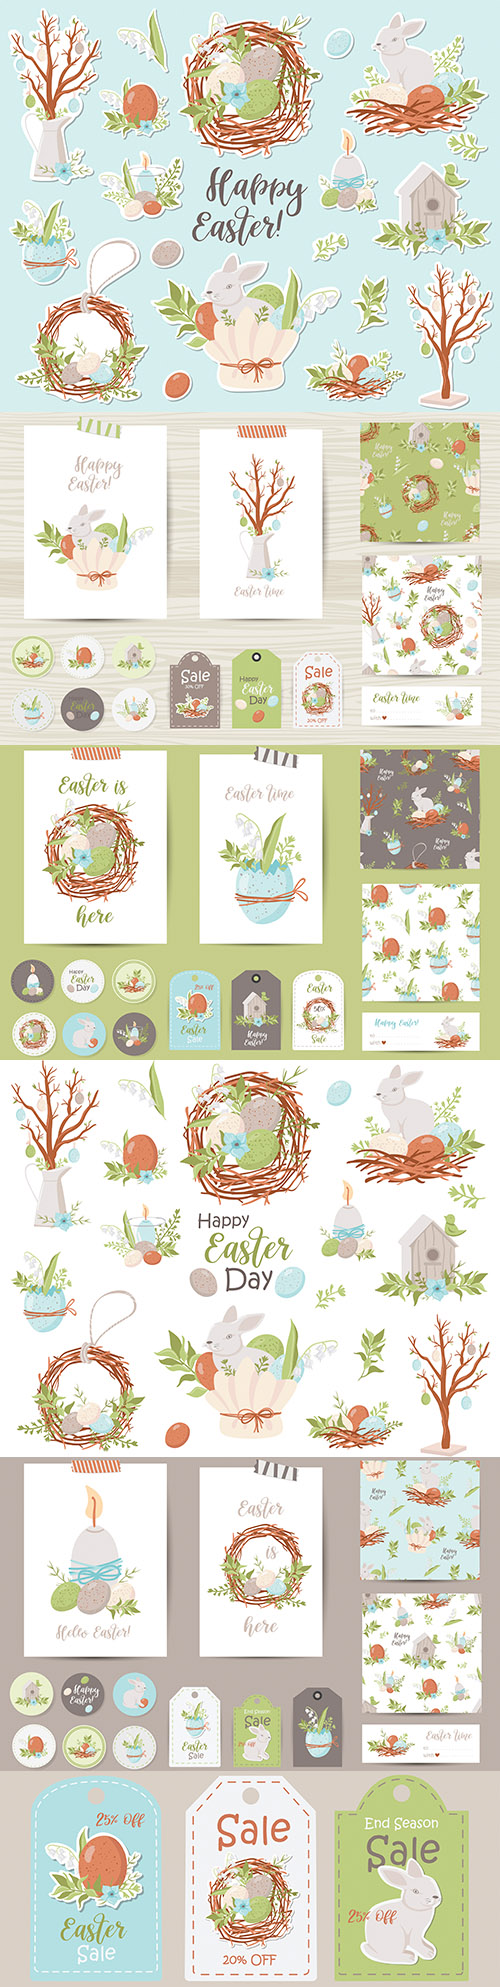 Happy Easter funny rabbit stickers and holiday elements
